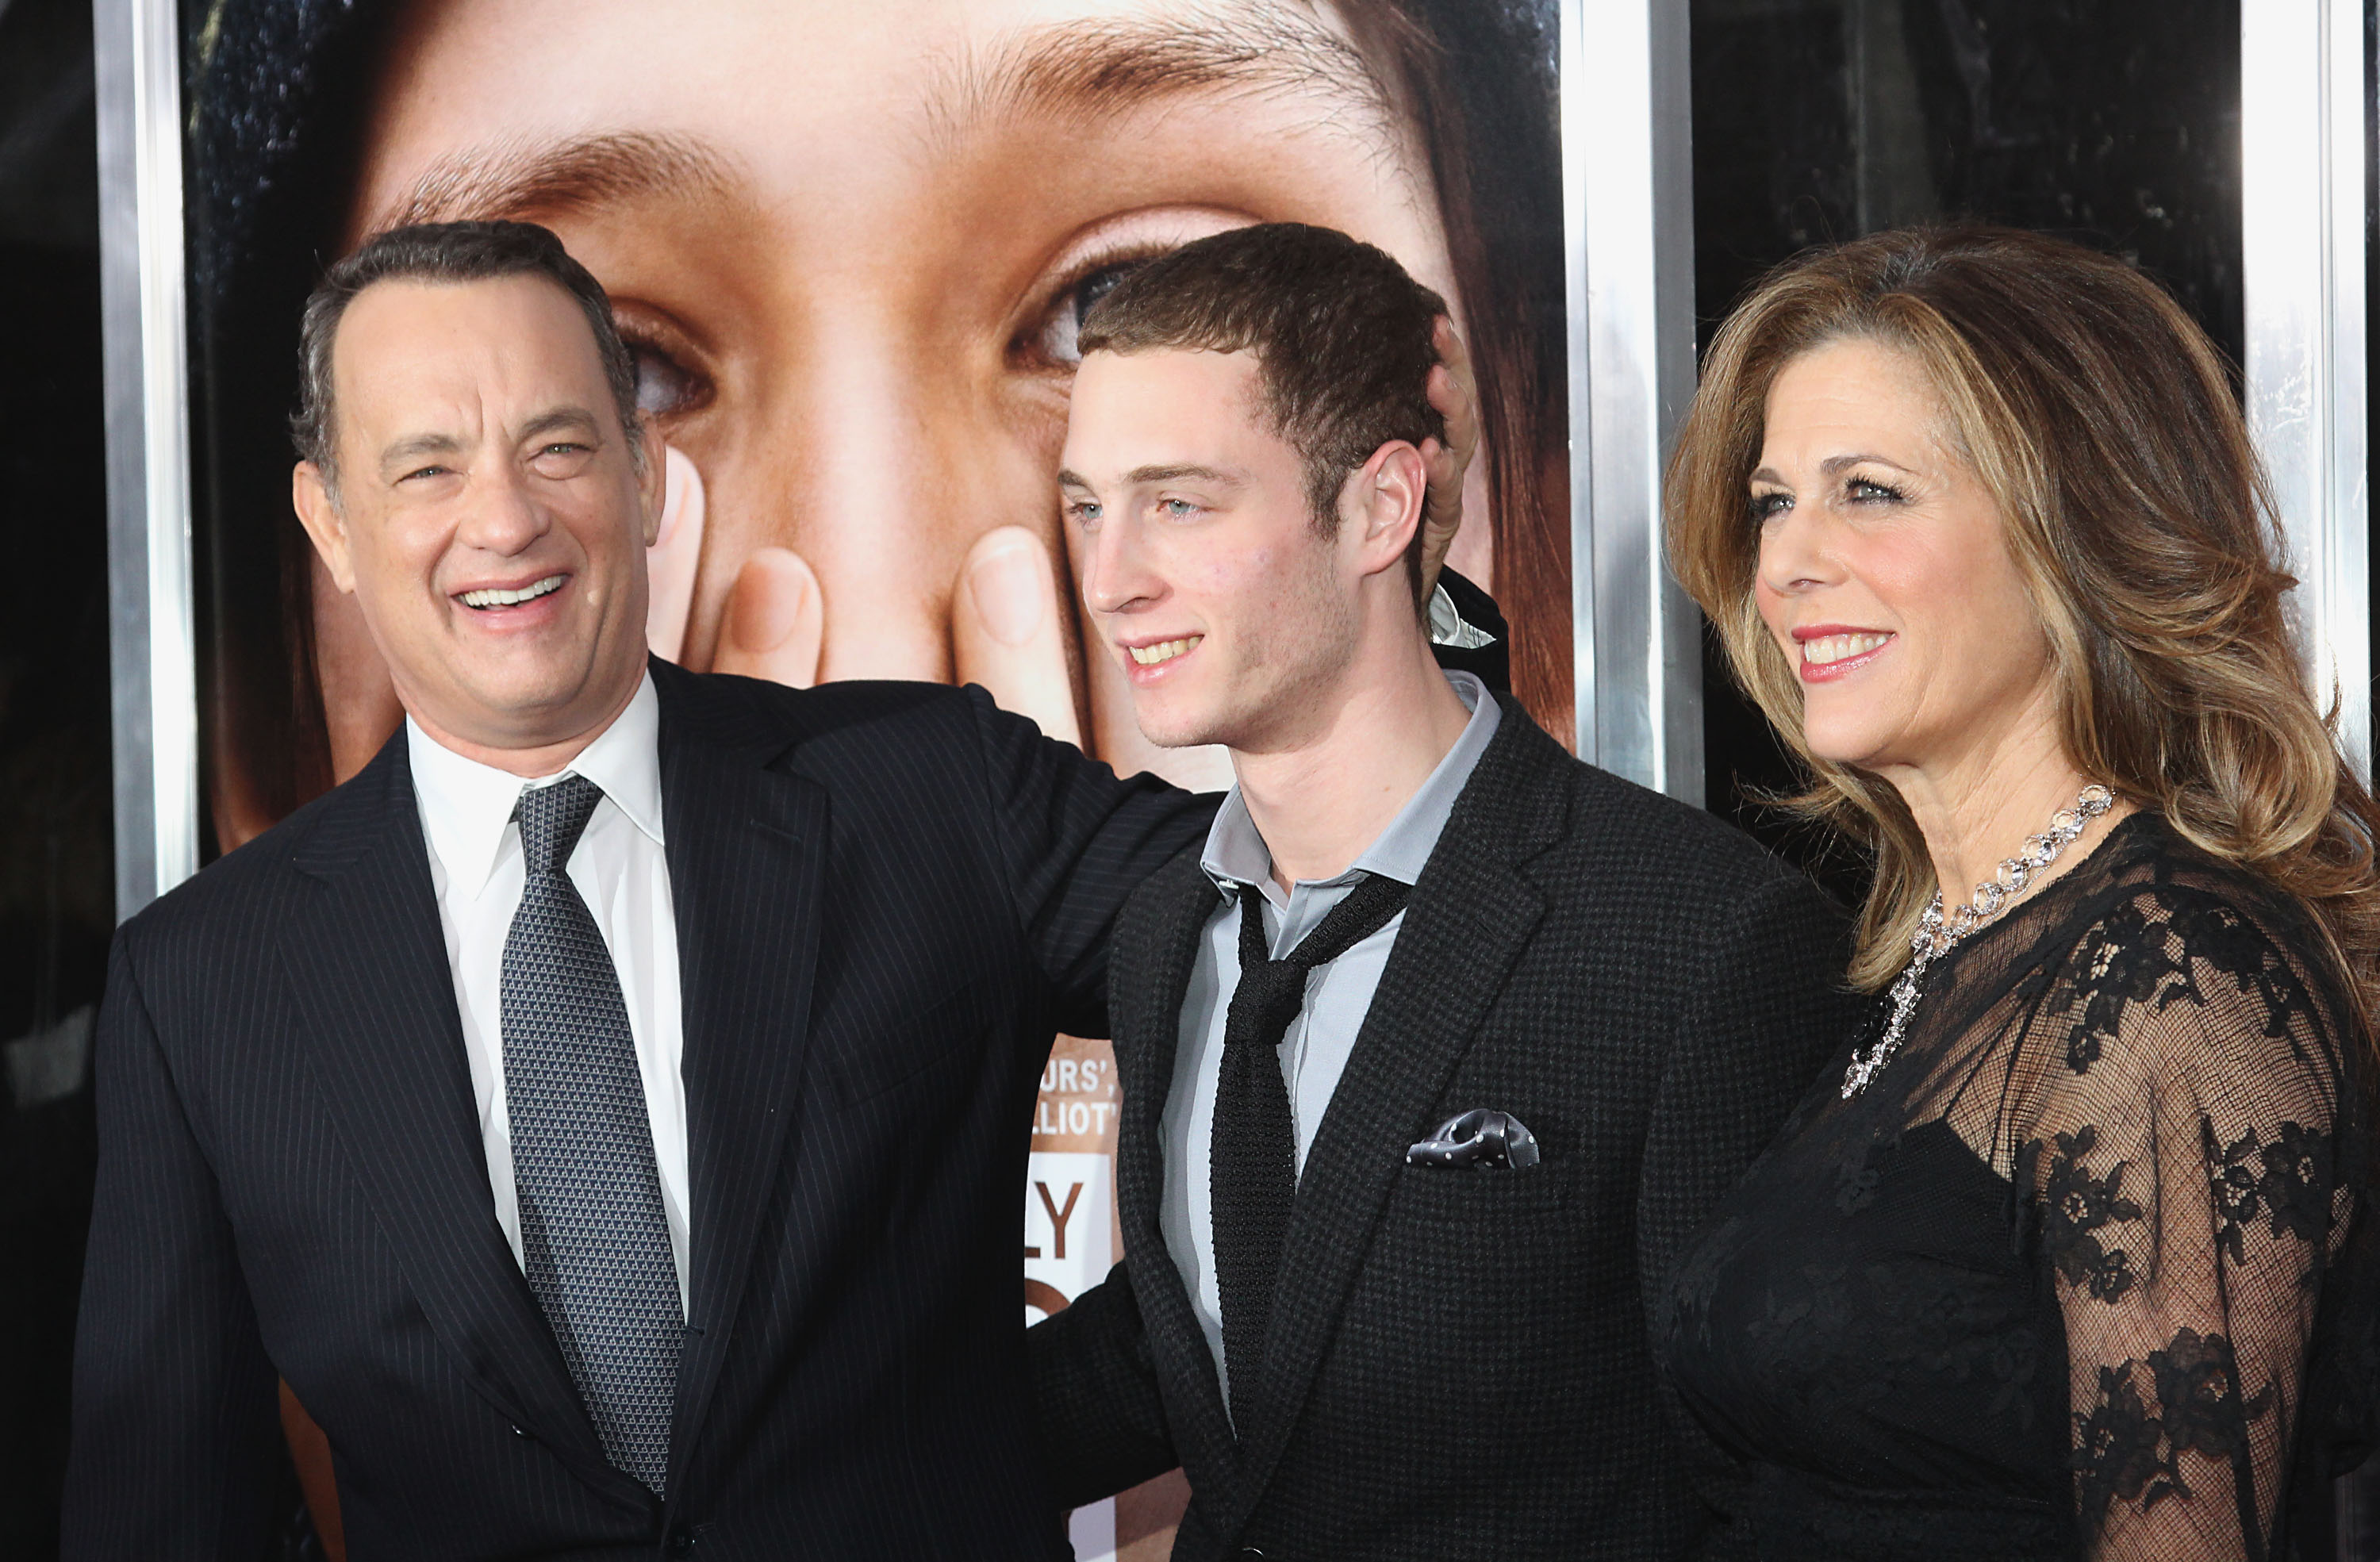 Tom and Chet Hanks with Rita Wilson at the premiere of "Extremely Loud & Incredibly Close" in New York City on December 15, 2011 | Source: Getty Images